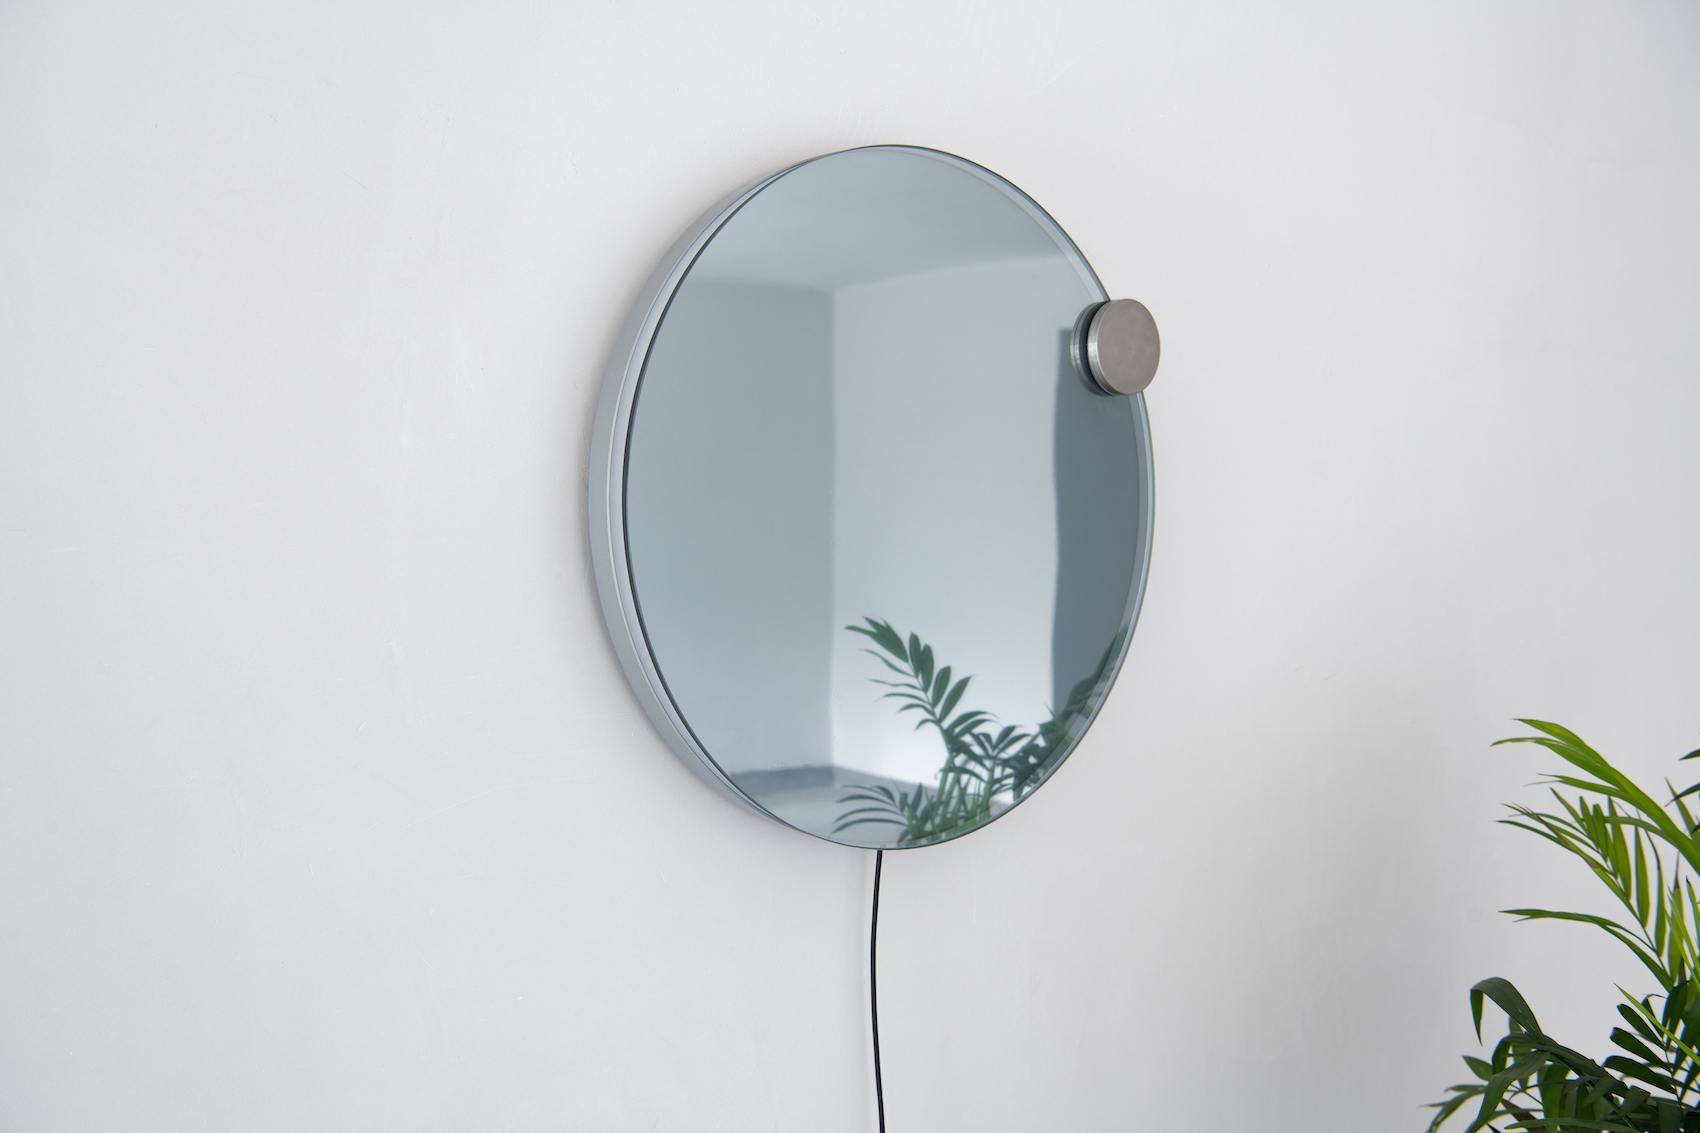 Minimalist Lamp and Mirror Combination "Eclipse" by Atelier JM